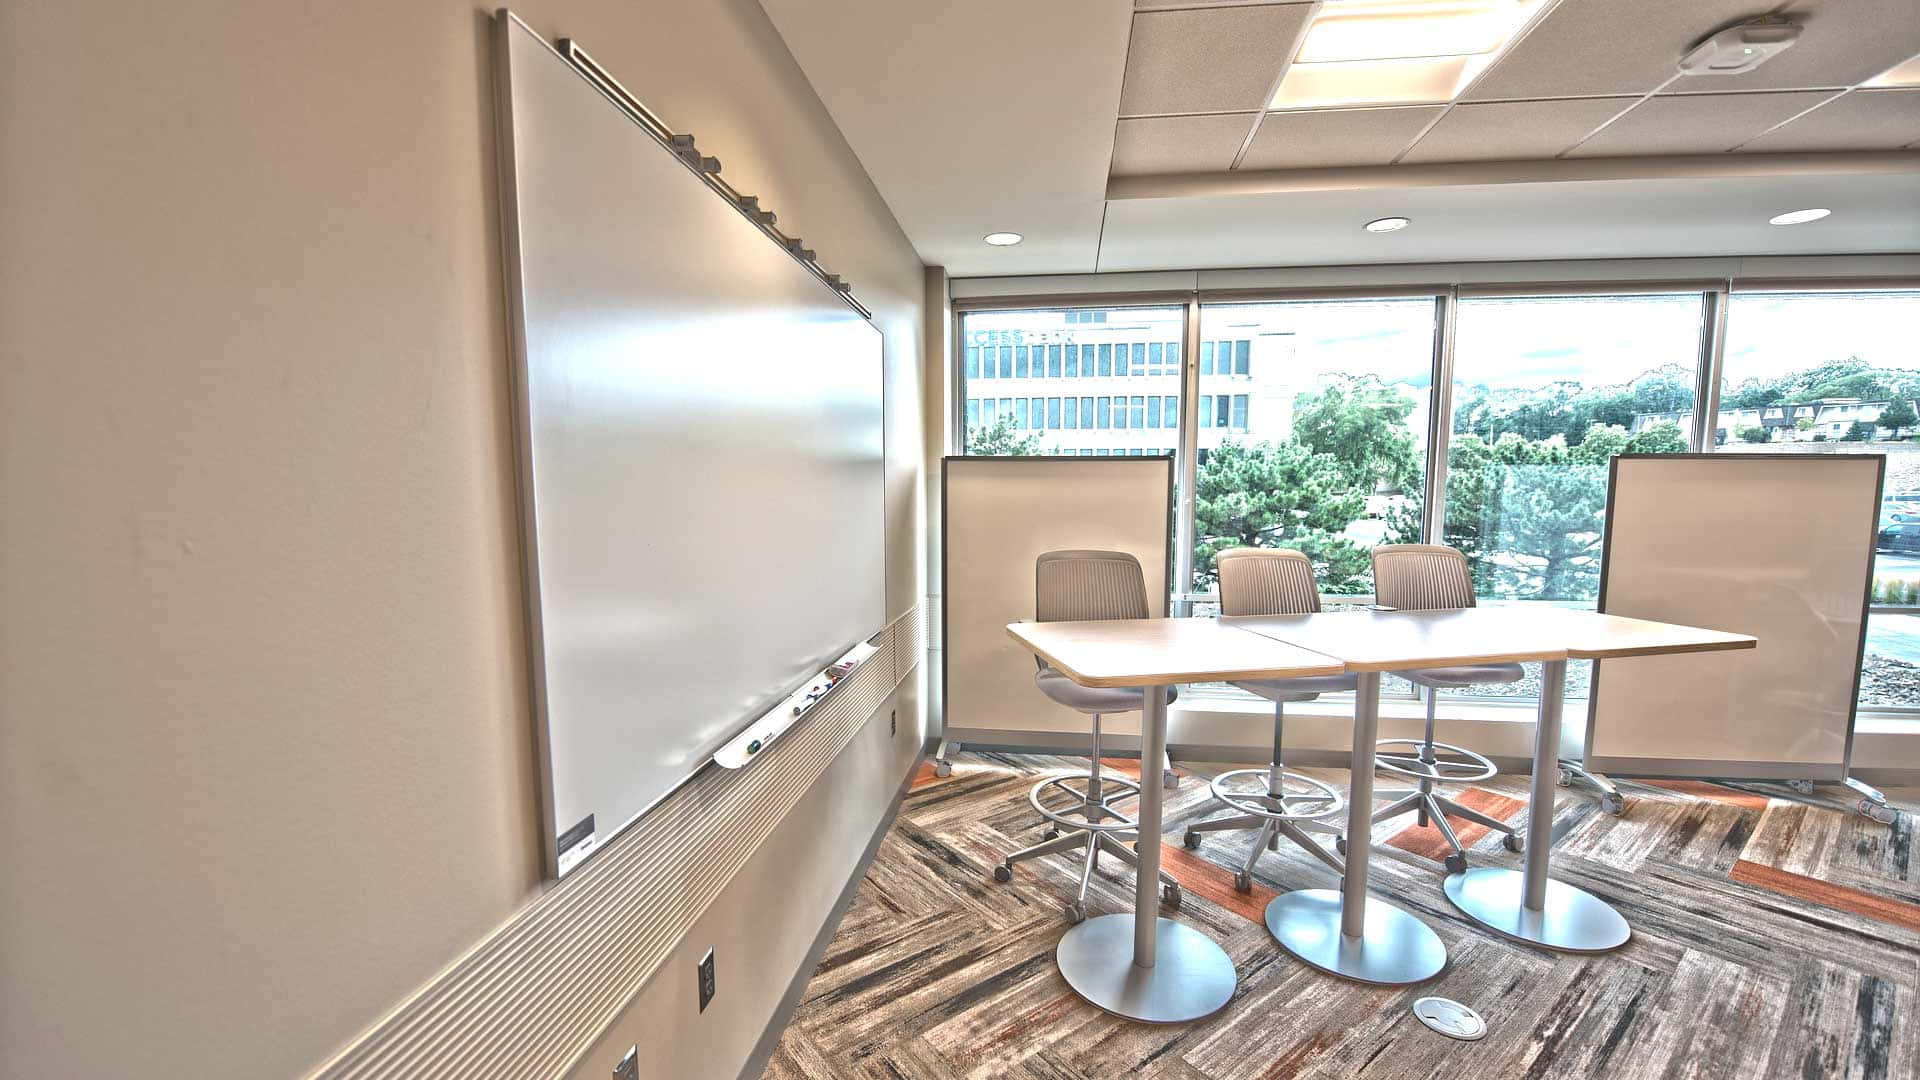 A Conference Room With A White Board And Chairs